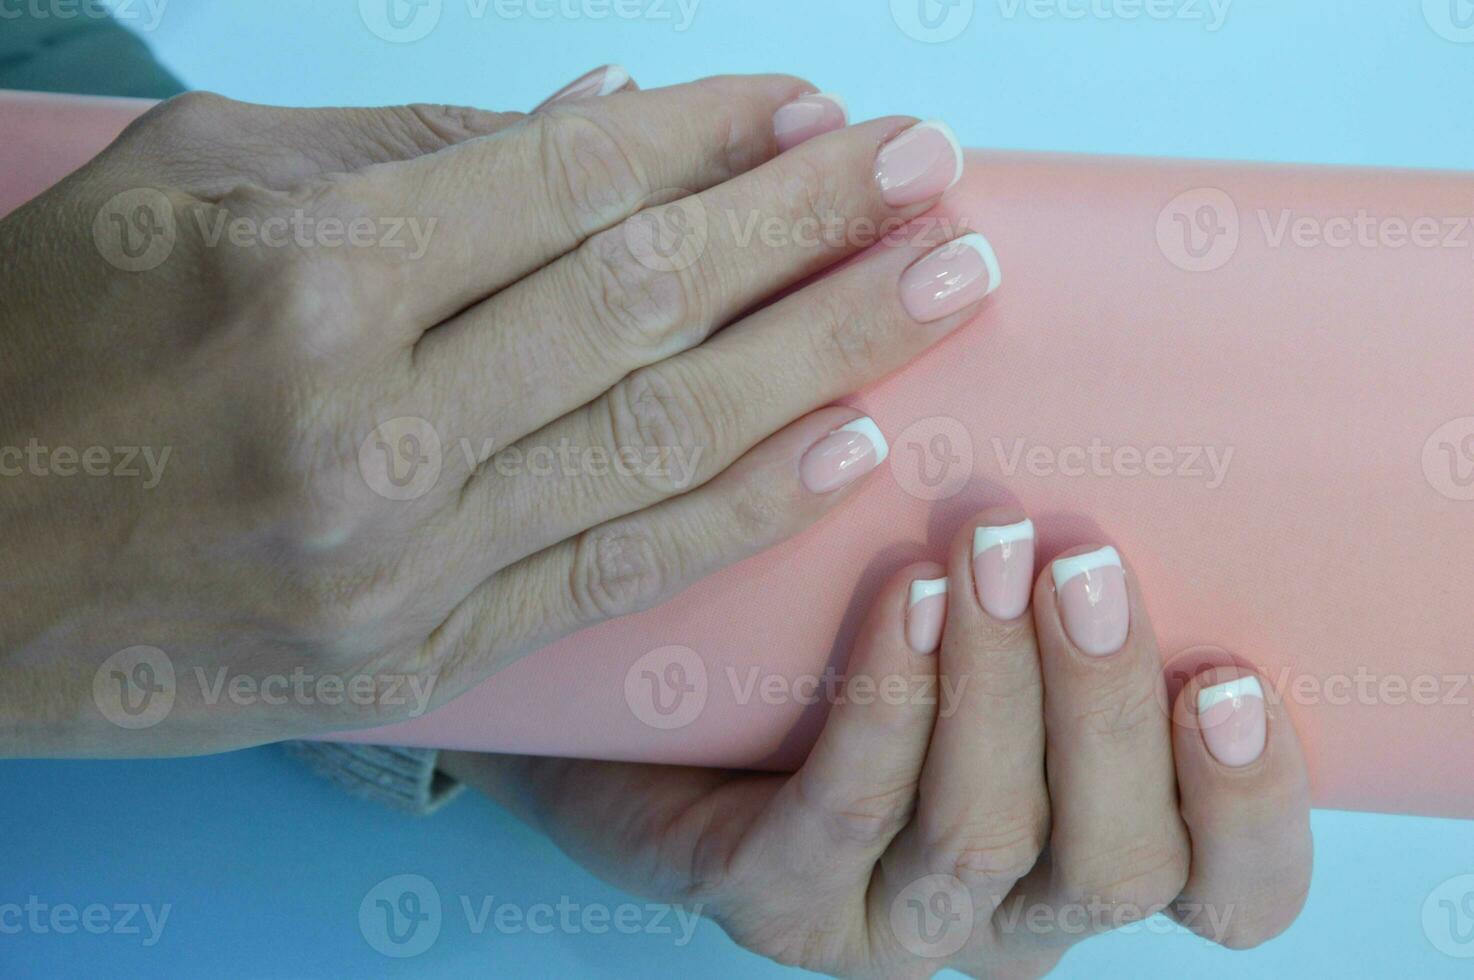 French manicure. Women's hands with beautiful manicured nails. Spa treatments and skin care photo